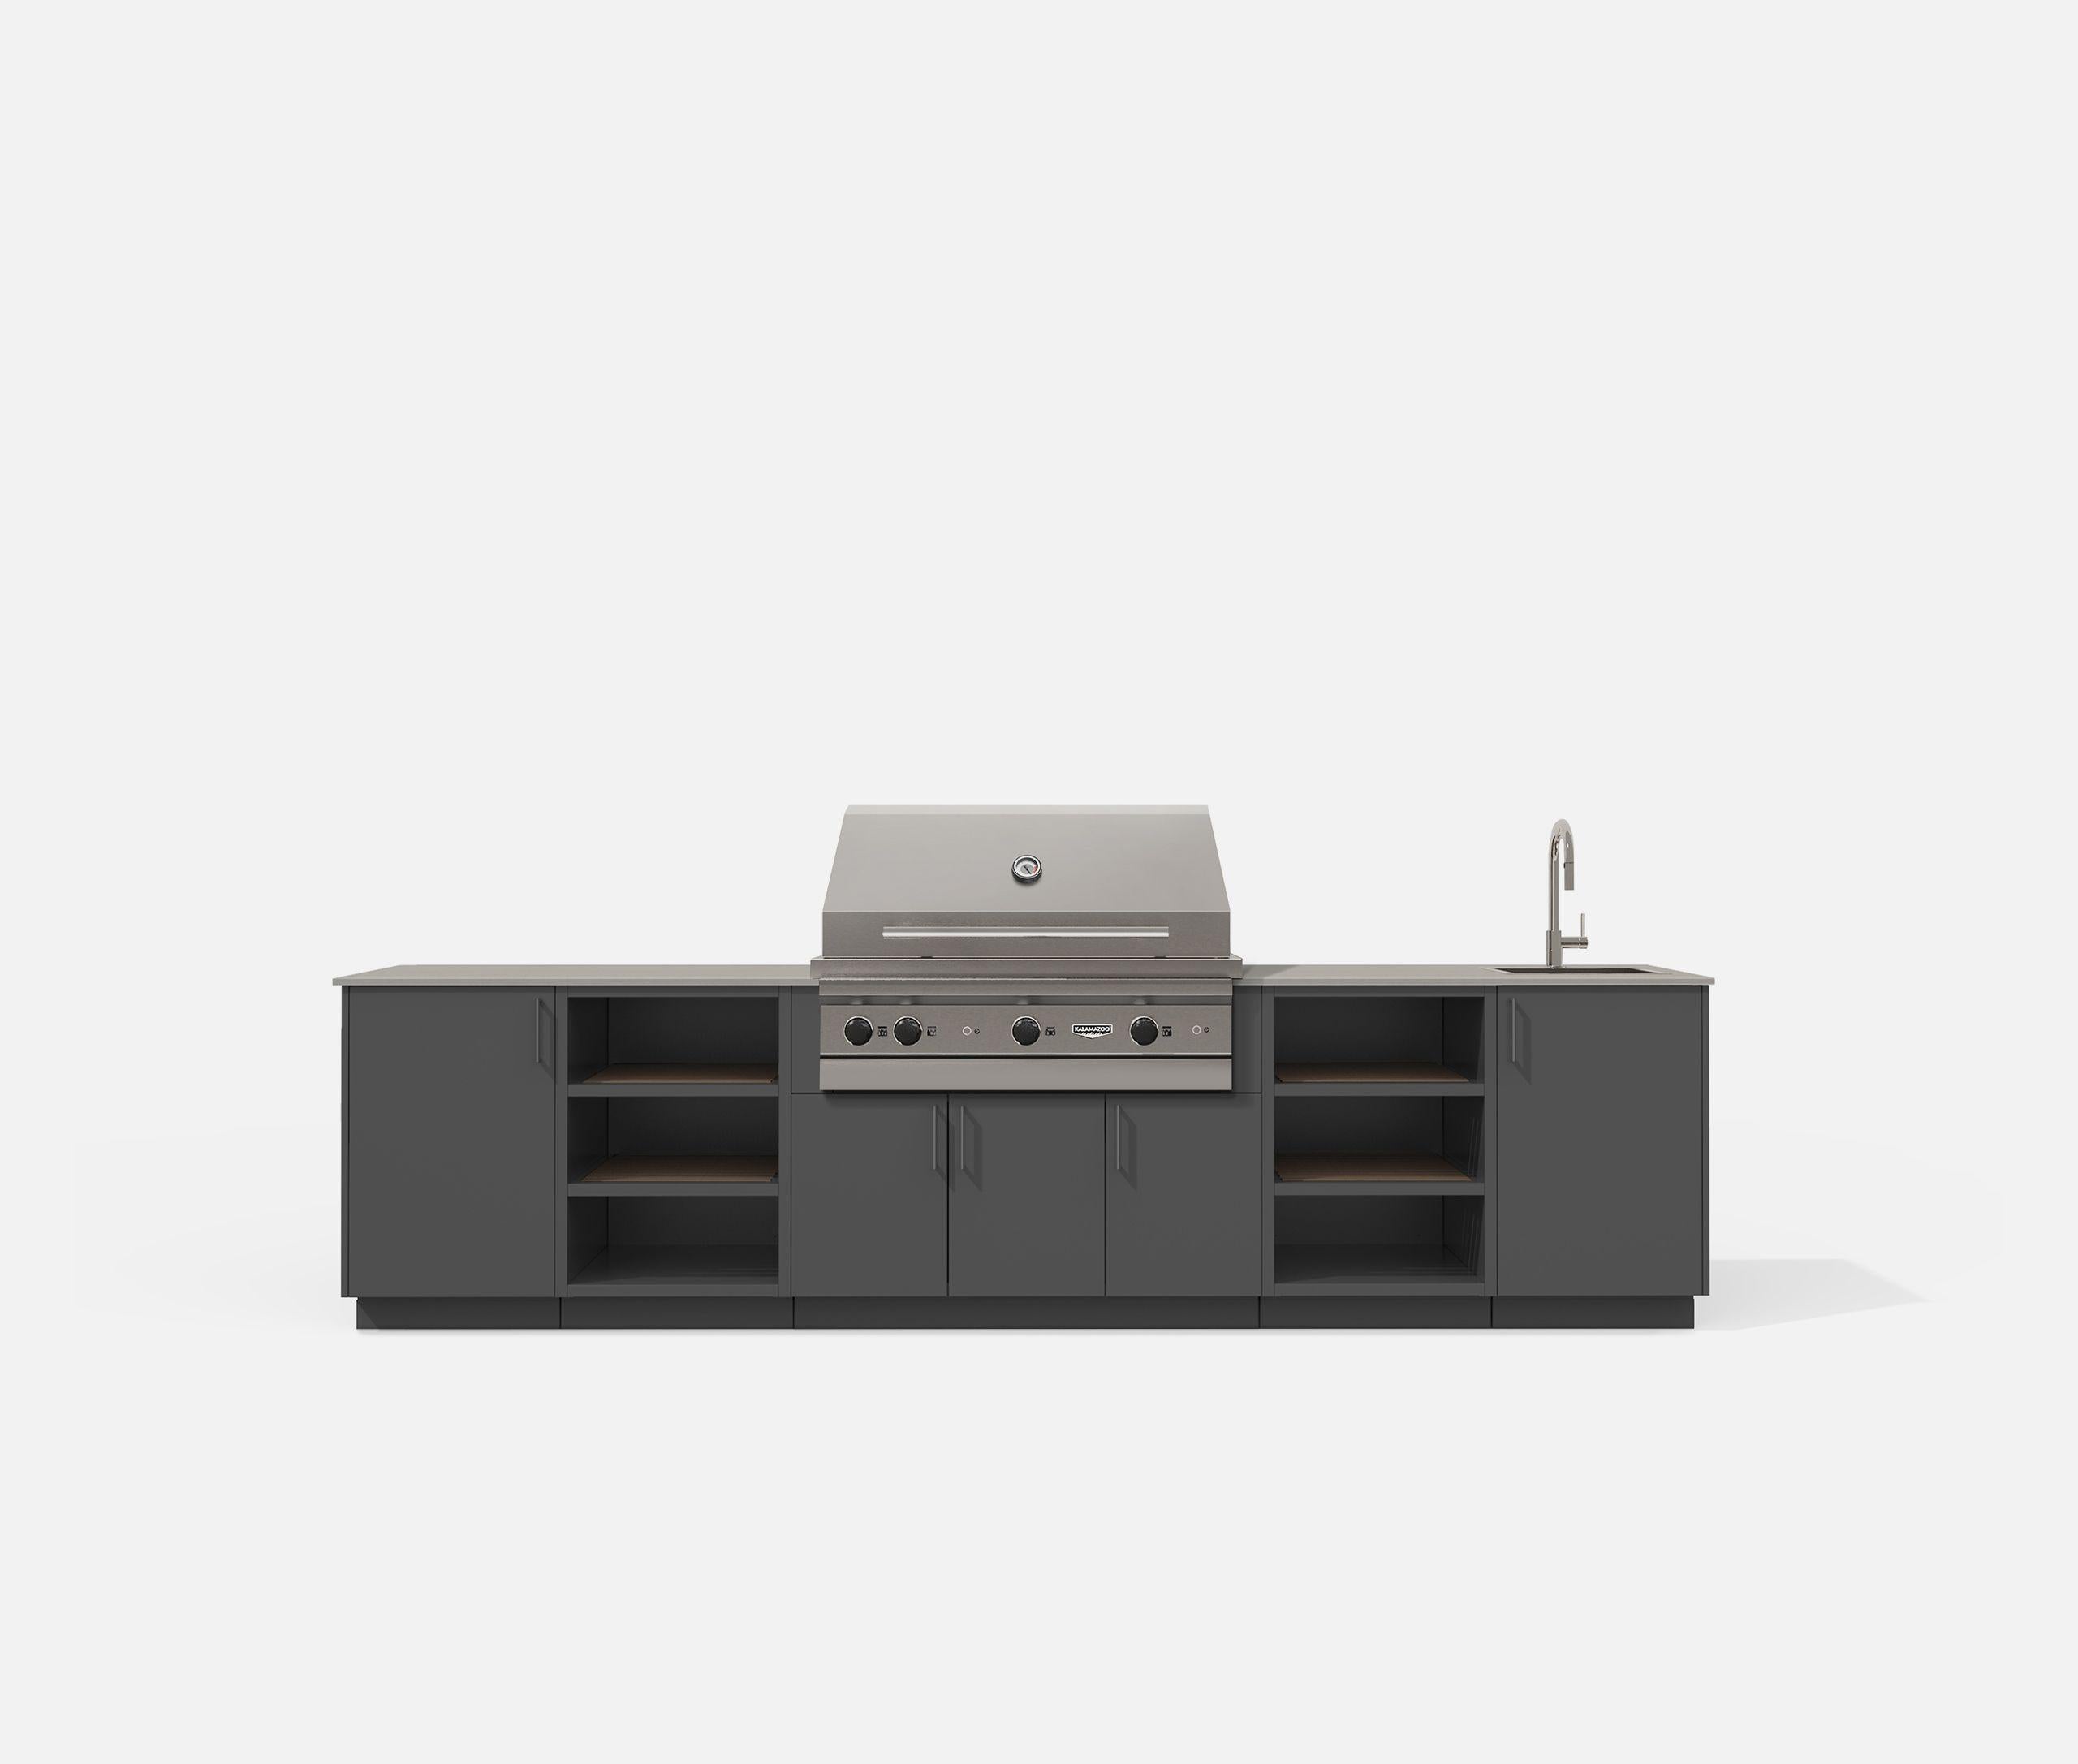 Urban Bonfire CSTRATUS42ANTHRACITE Stratus 42 Outdoor Kitchen (Anthracite)GRILL SOLD SEPARATELY